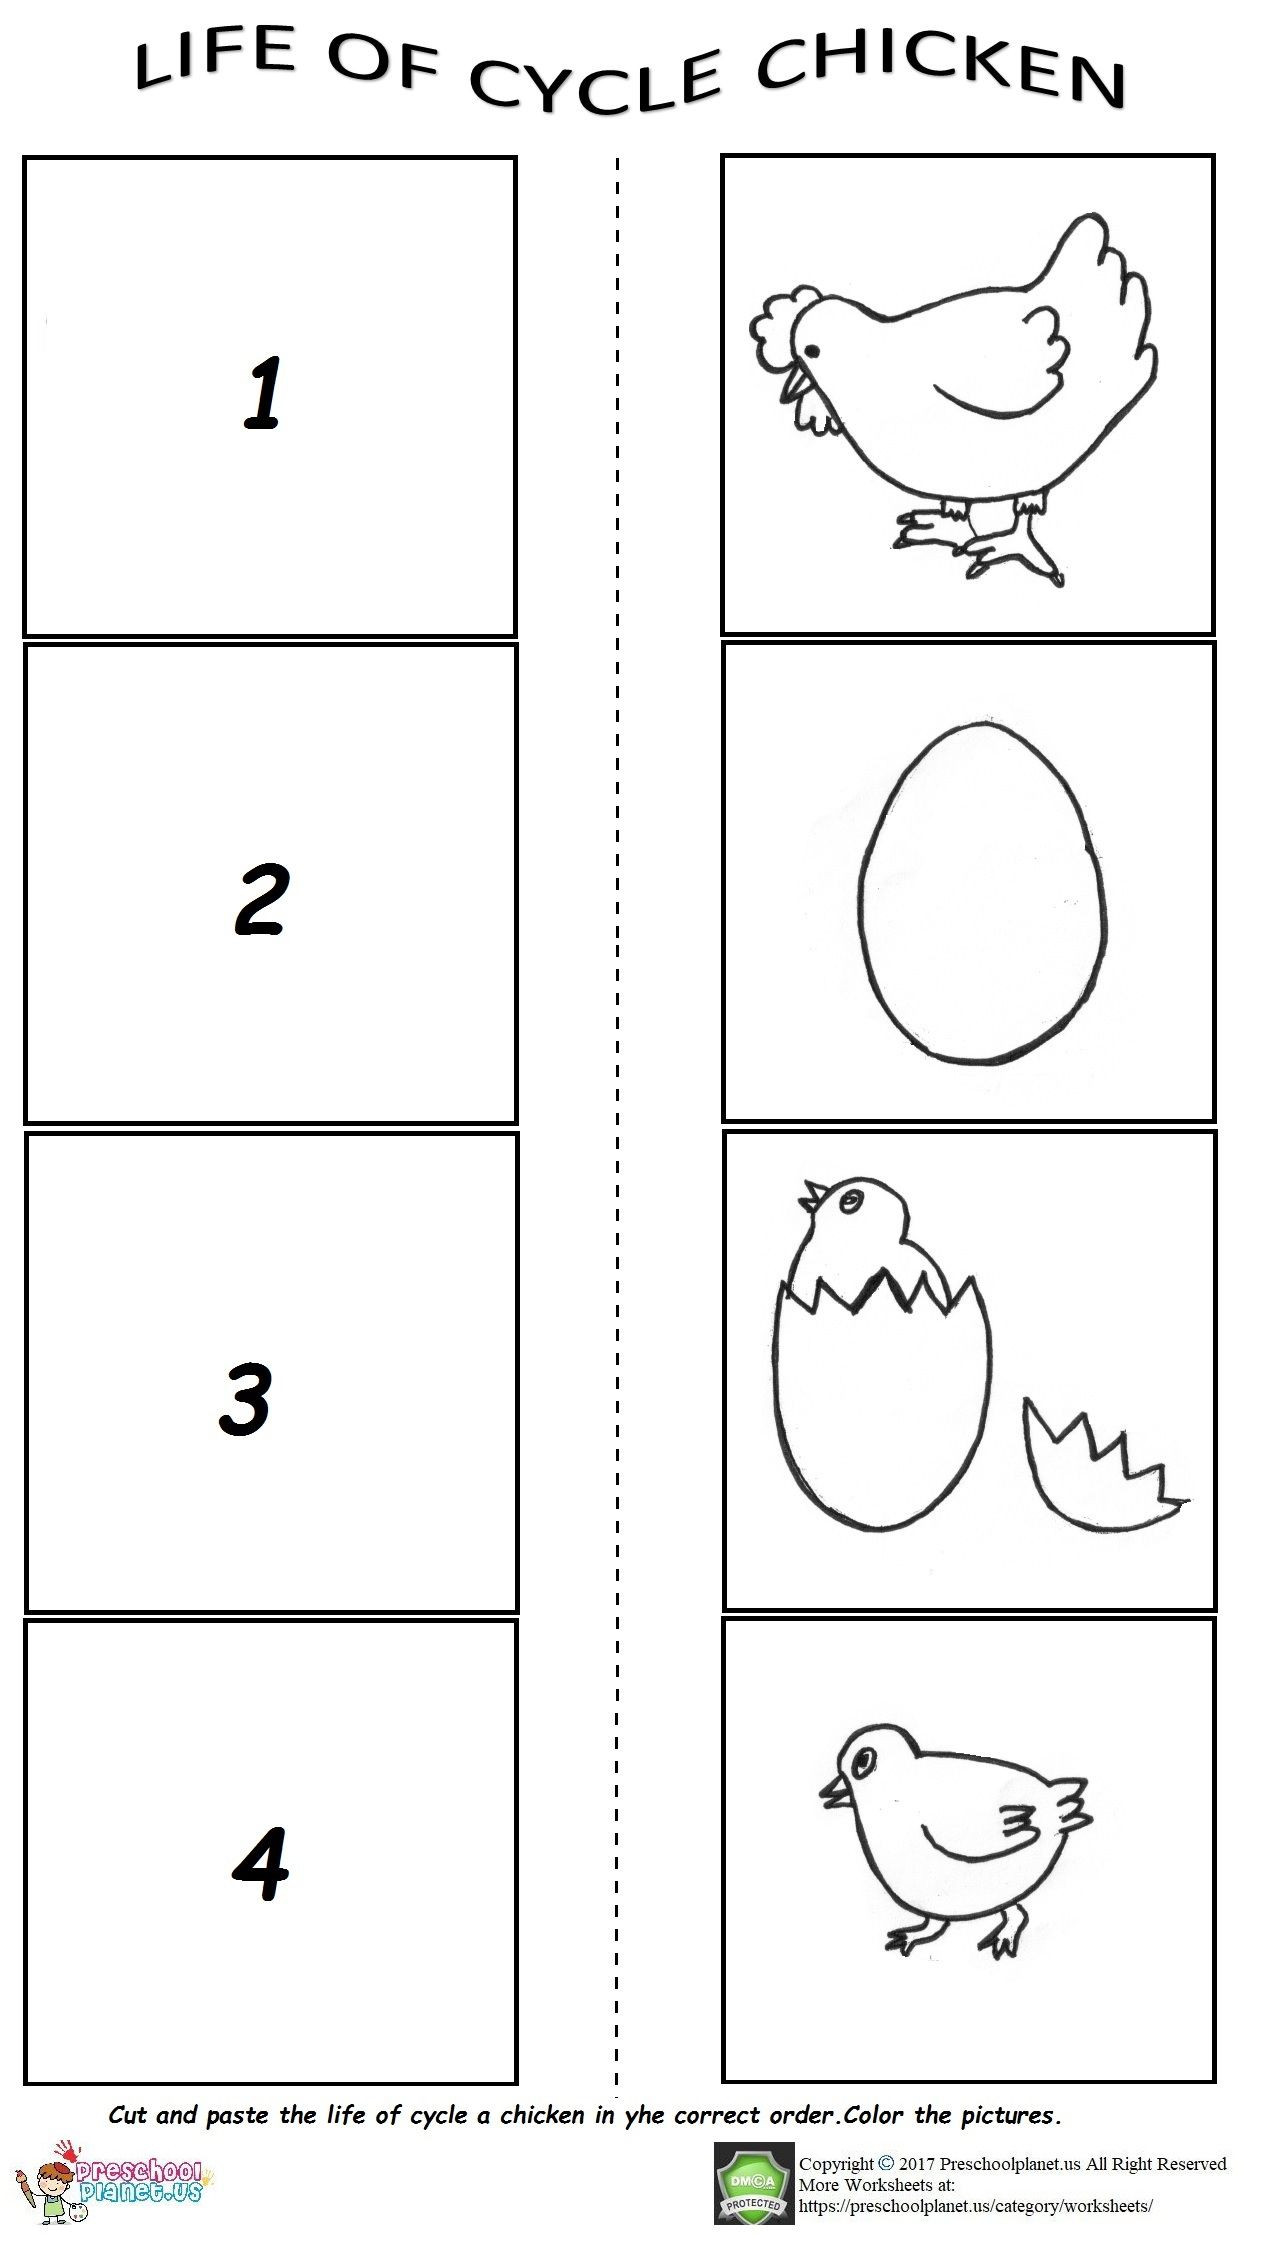 Preschool Coloring Sheets Of A Chicken Free Printable
 Life of cycle worksheet for preschool